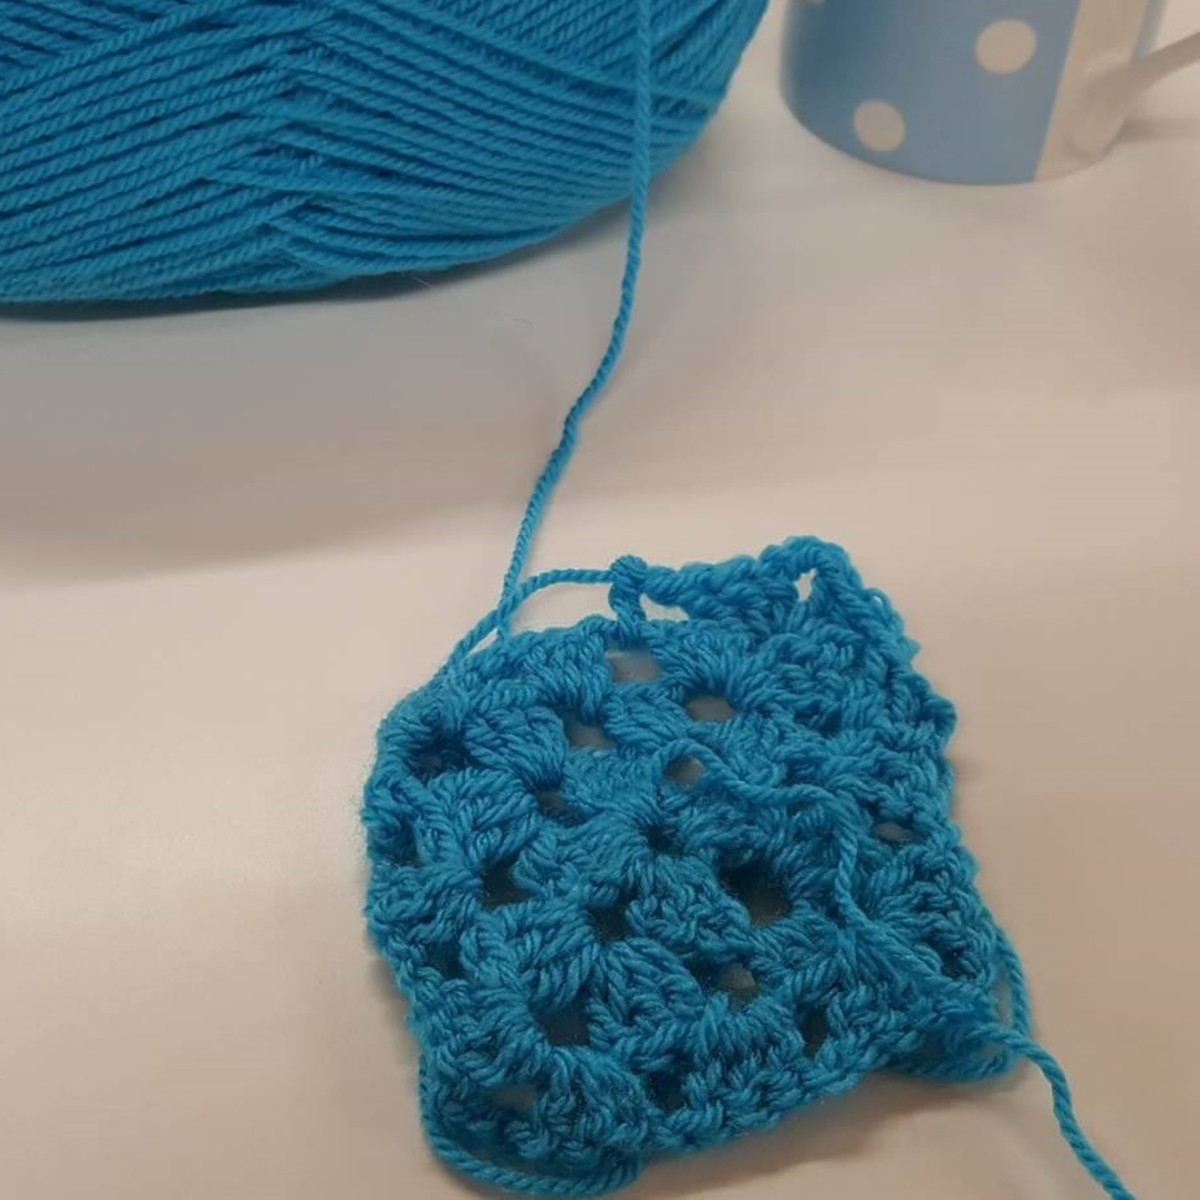 Crochet grows a lot faster than knitting does, so this might be a better craft for those who need quick gratification for their efforts, like me.